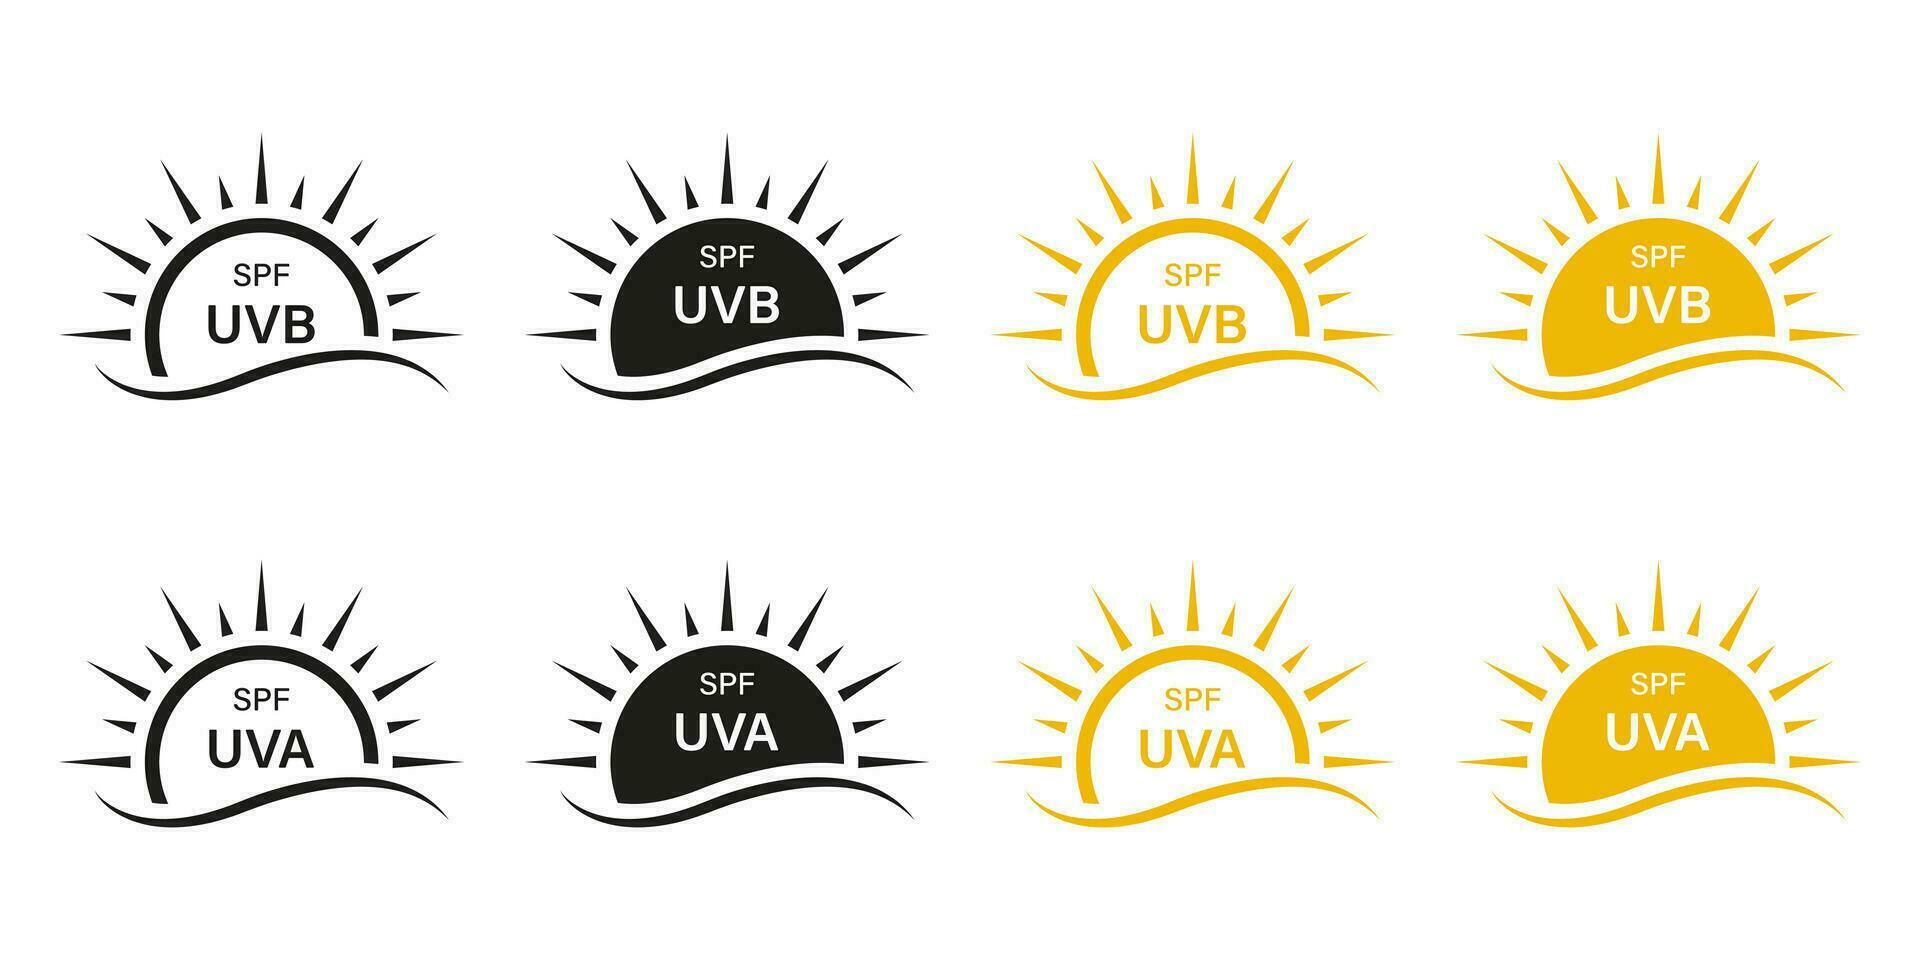 Sunscreen Lotion, SPF UVA UVB Protect Icon Set. Sunblock Cream Labels. UV Skin Protection Pictogram. Anti Ultraviolet Rays, Block Solar Radiation Symbol Collection. Isolated Vector Illustration.